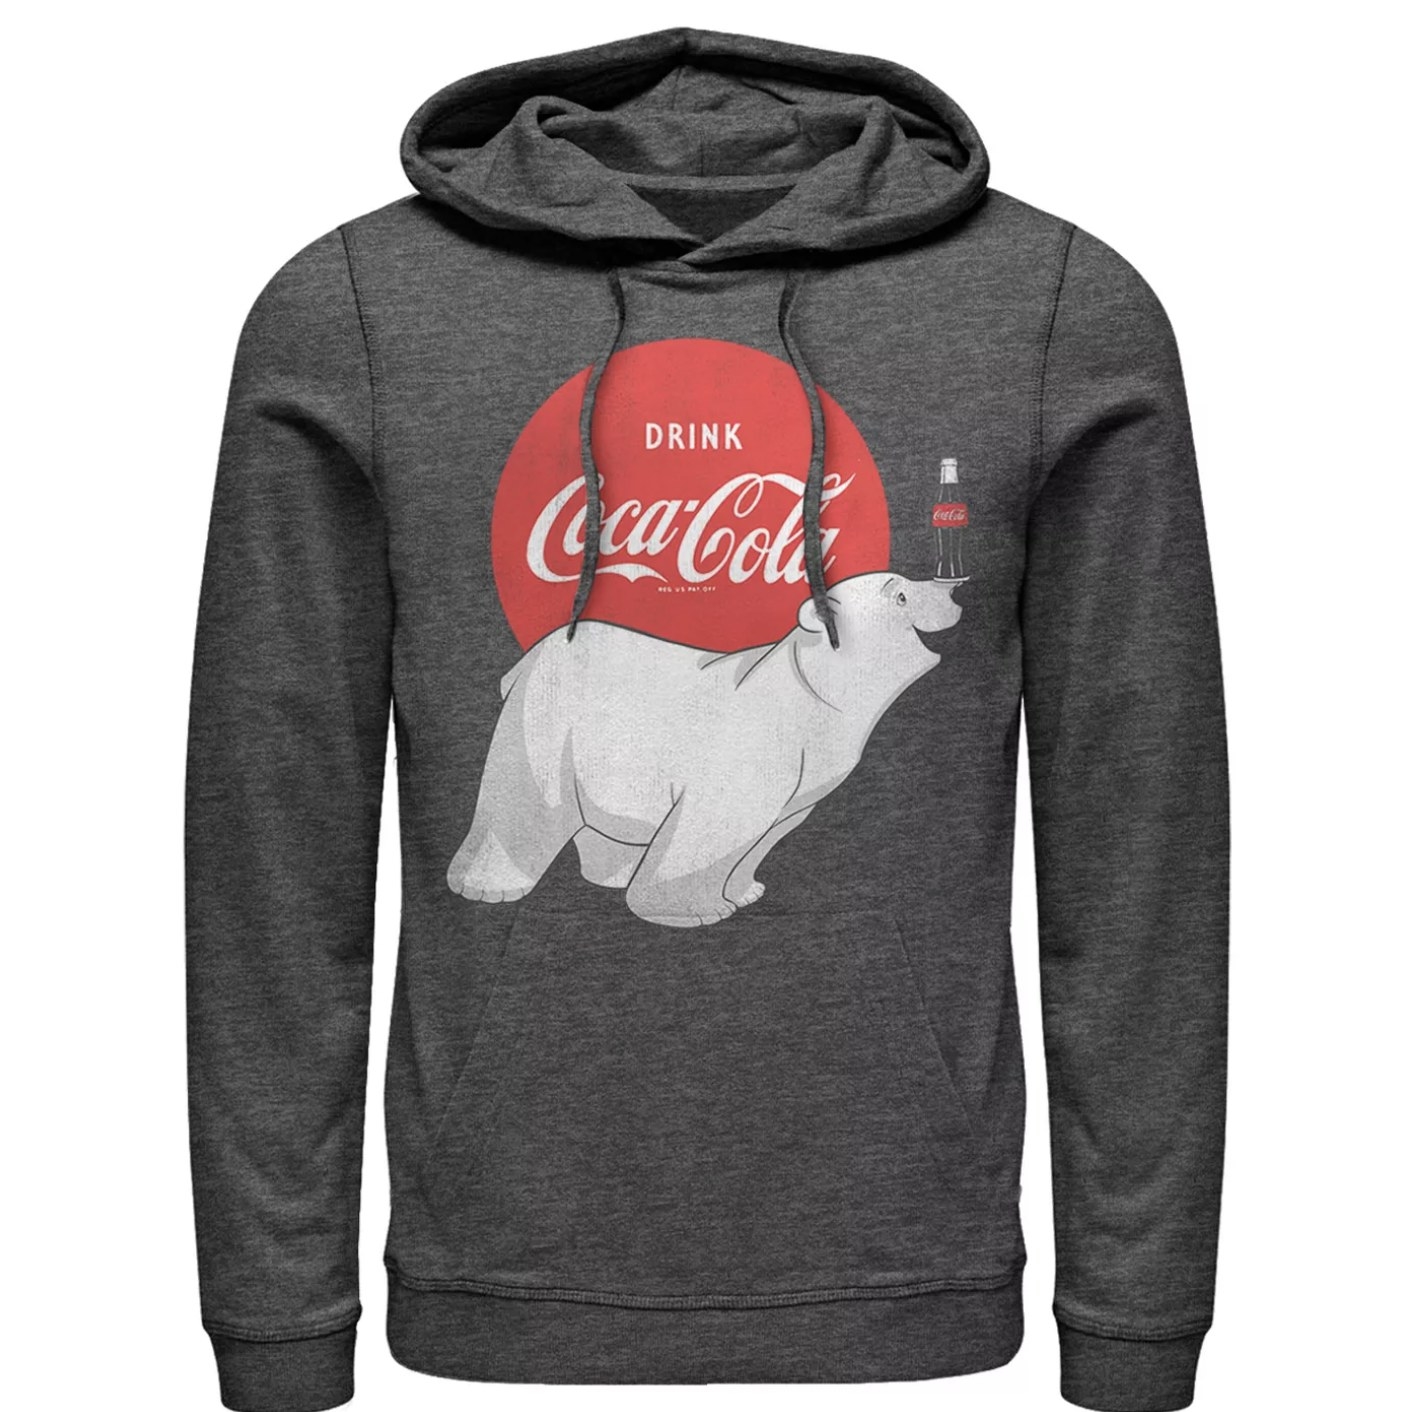 The grey hoodie with the coca-cola logo and a polar bear